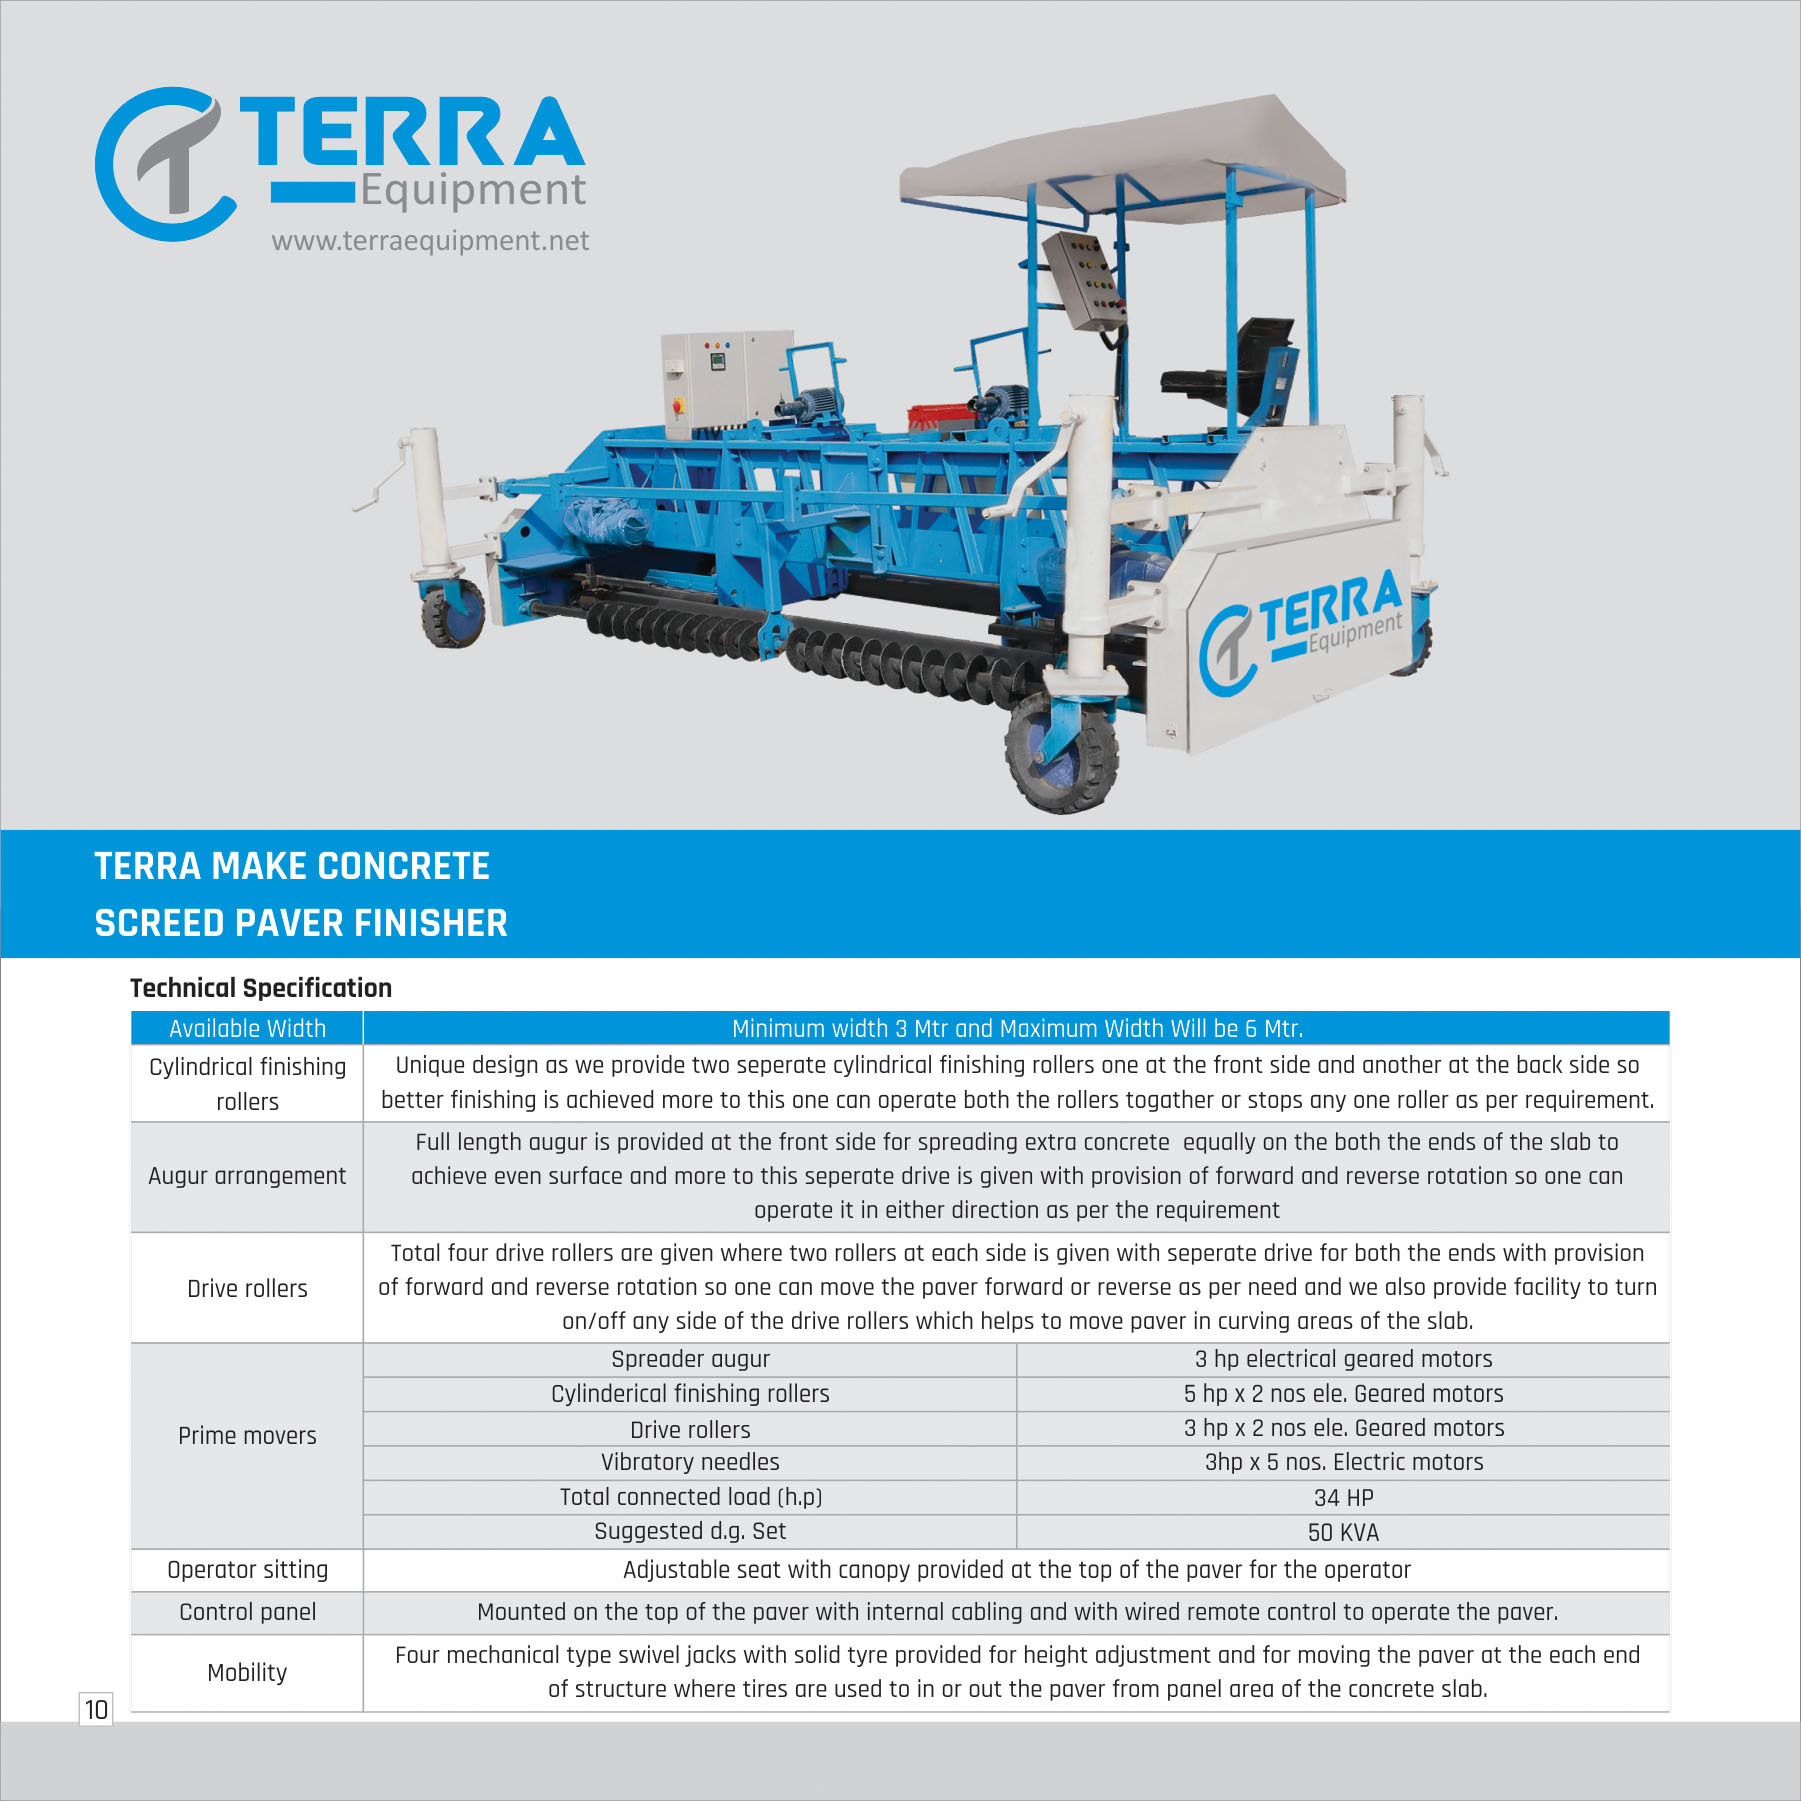 Concrete Screed Paver Finisher